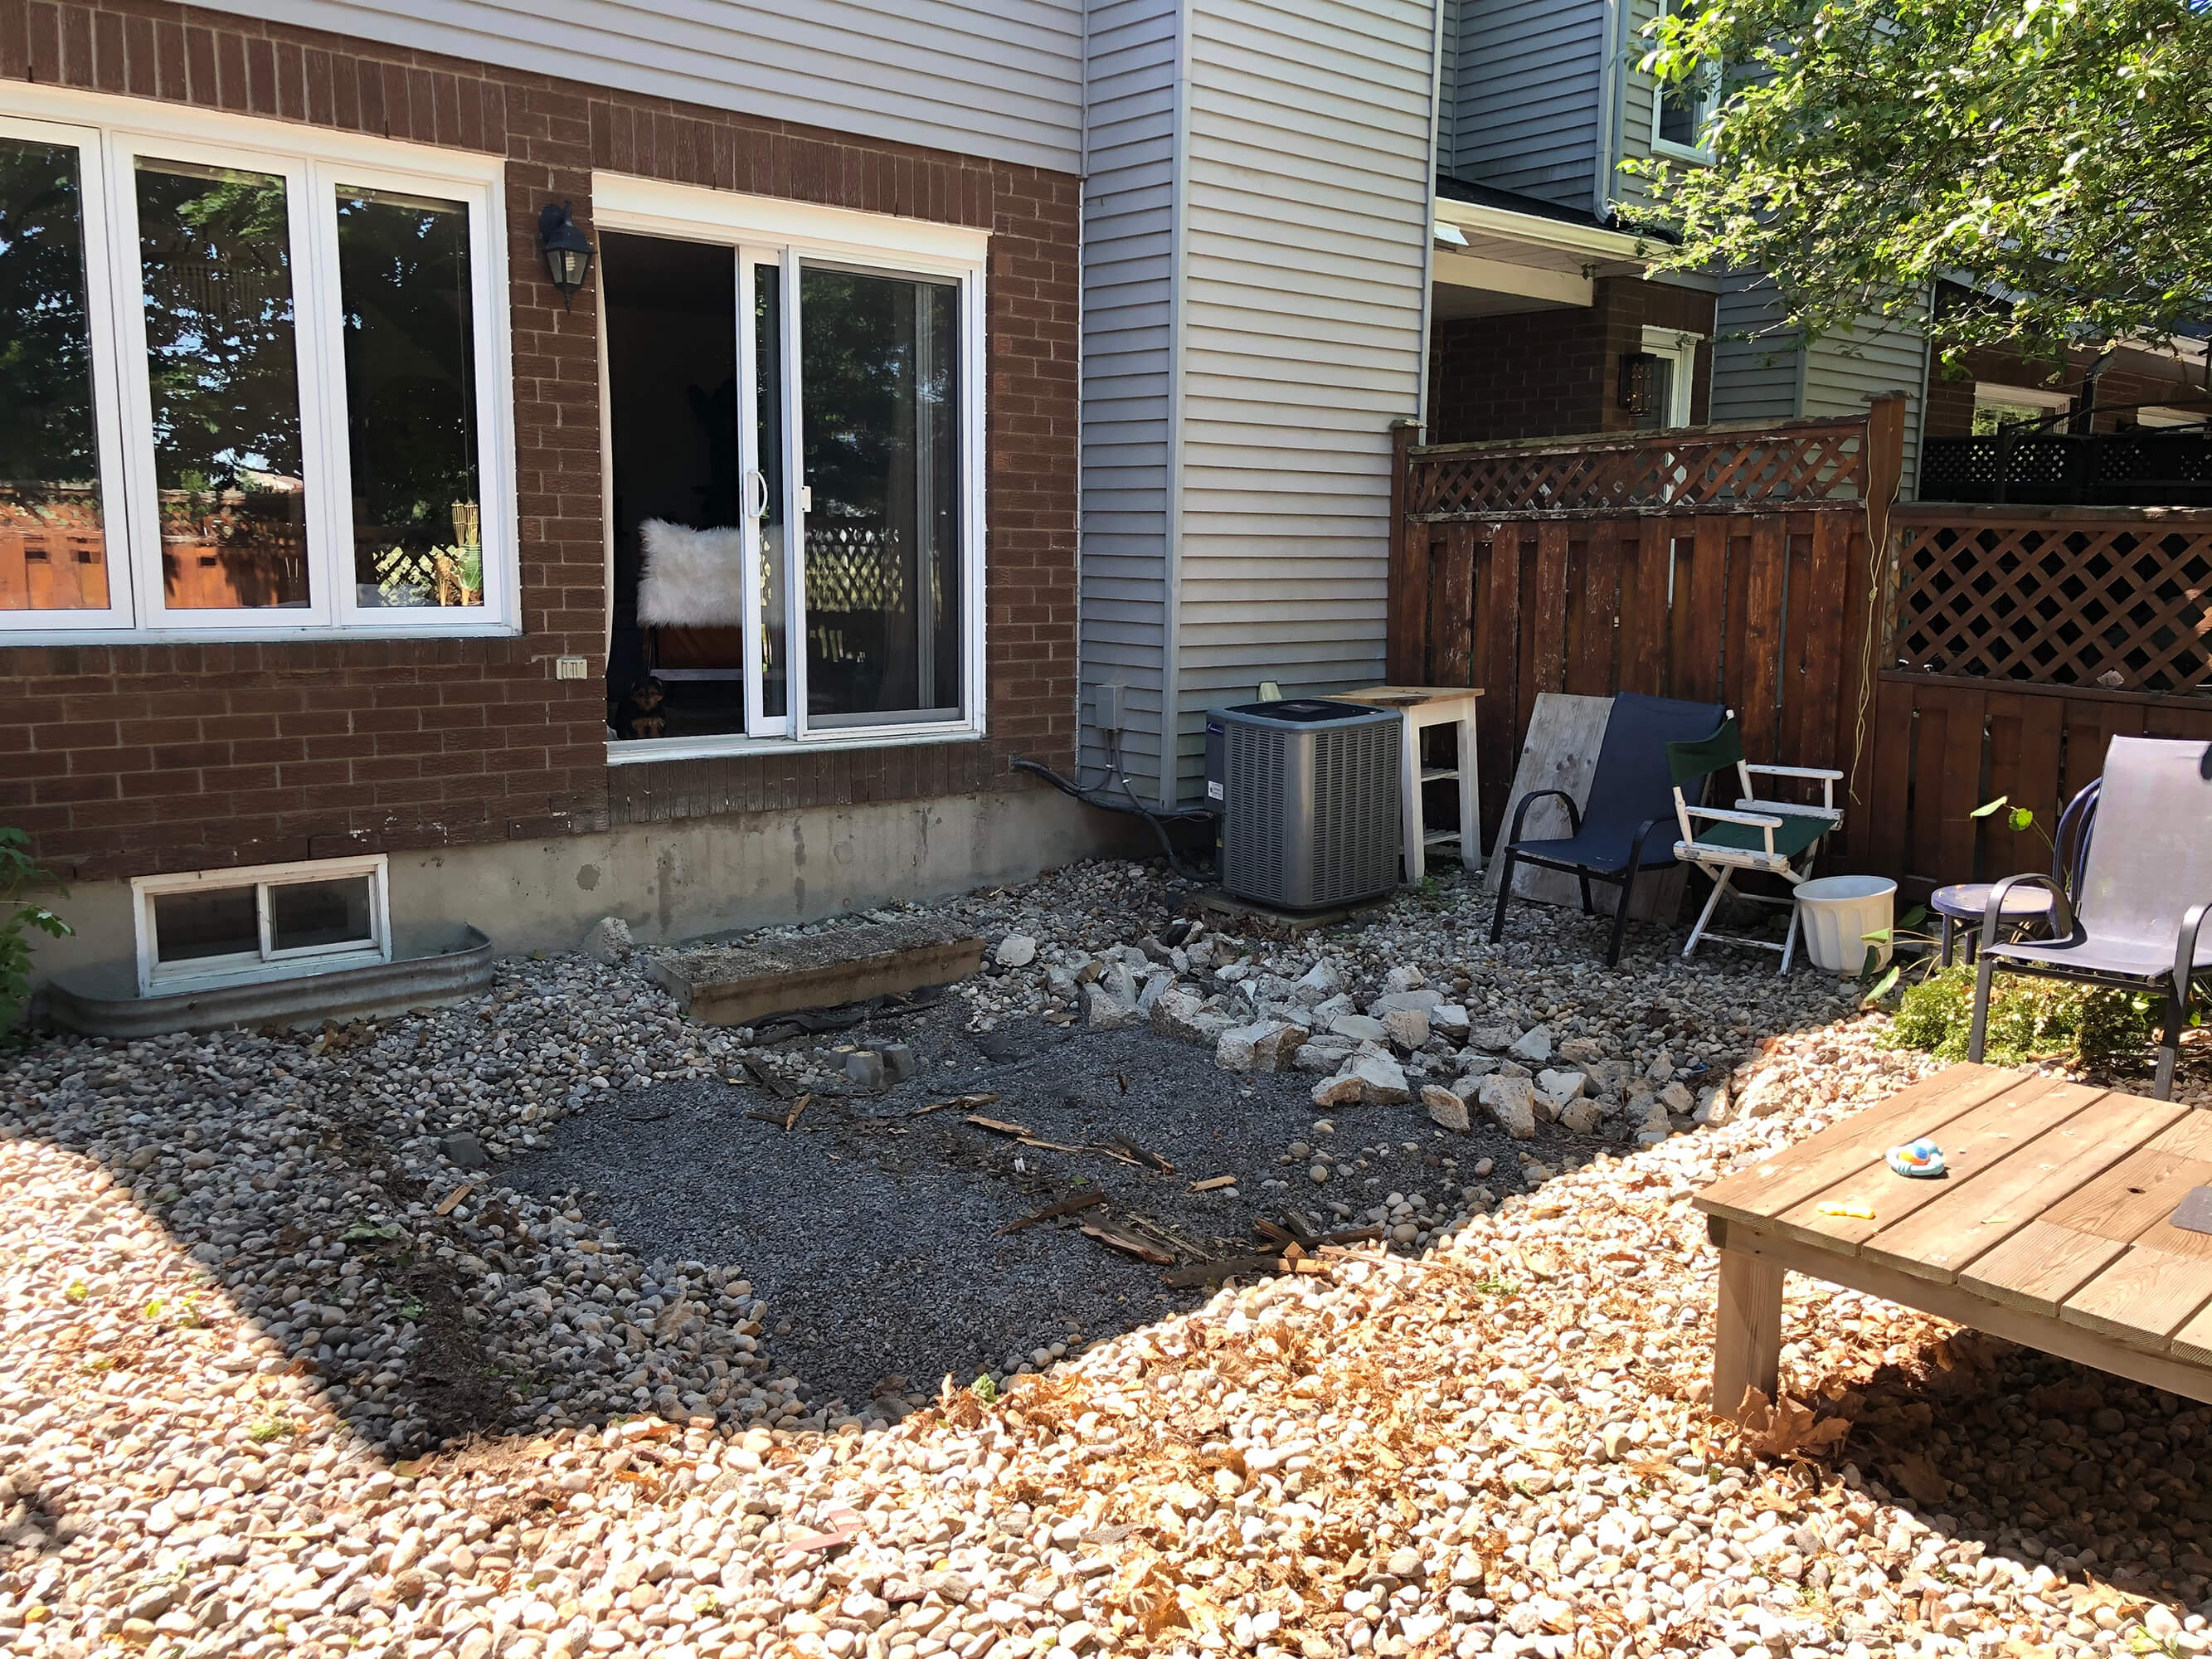 Ottawa interior design studio, West of Main's backyard transformation with old deck removed before work began.